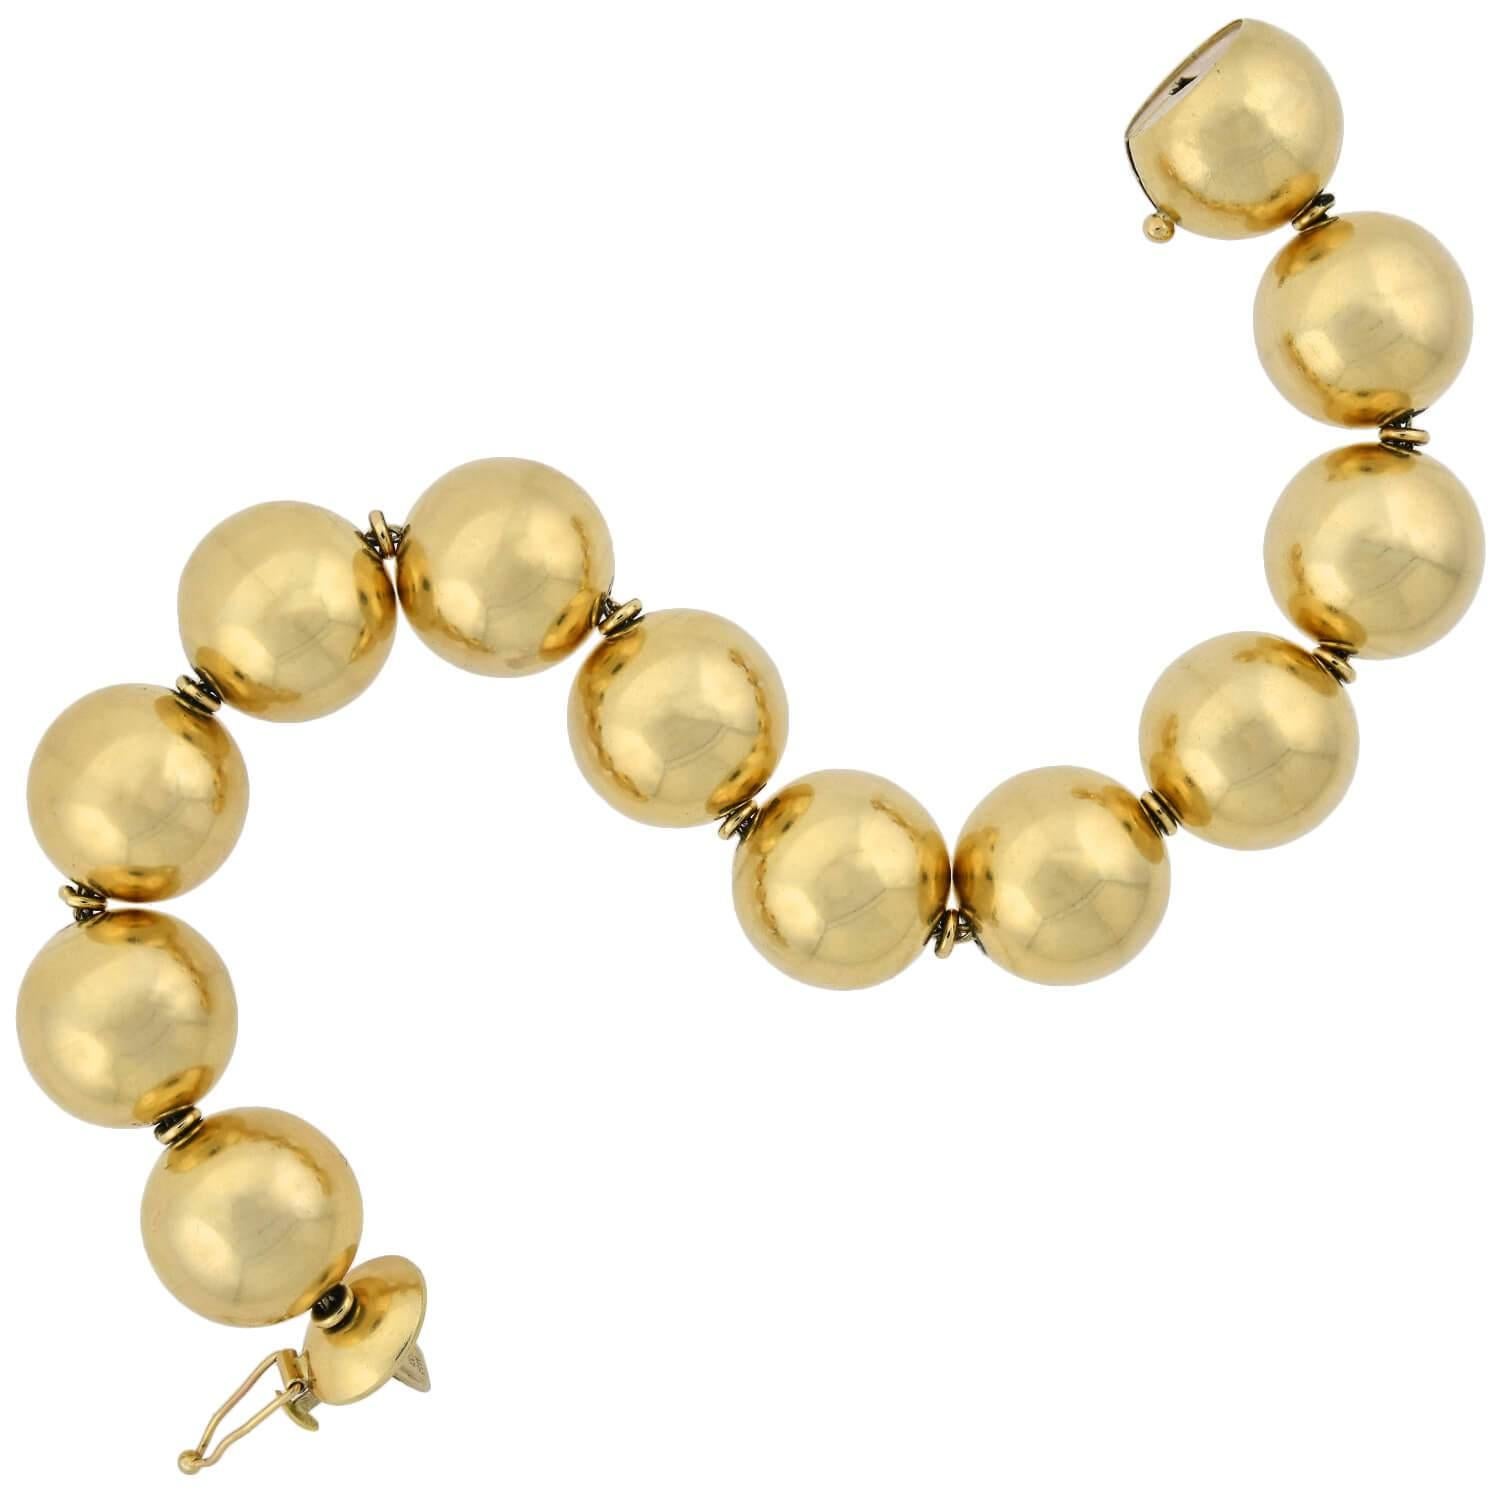 A stunning Vintage gold bead bracelet from 1950's! Crafted in 14kt yellow gold, this simple yet eye-catching bracelet is comprised of 12 smoothly polished gold balls, which form a straight but flexible design that wraps around the wrist. The